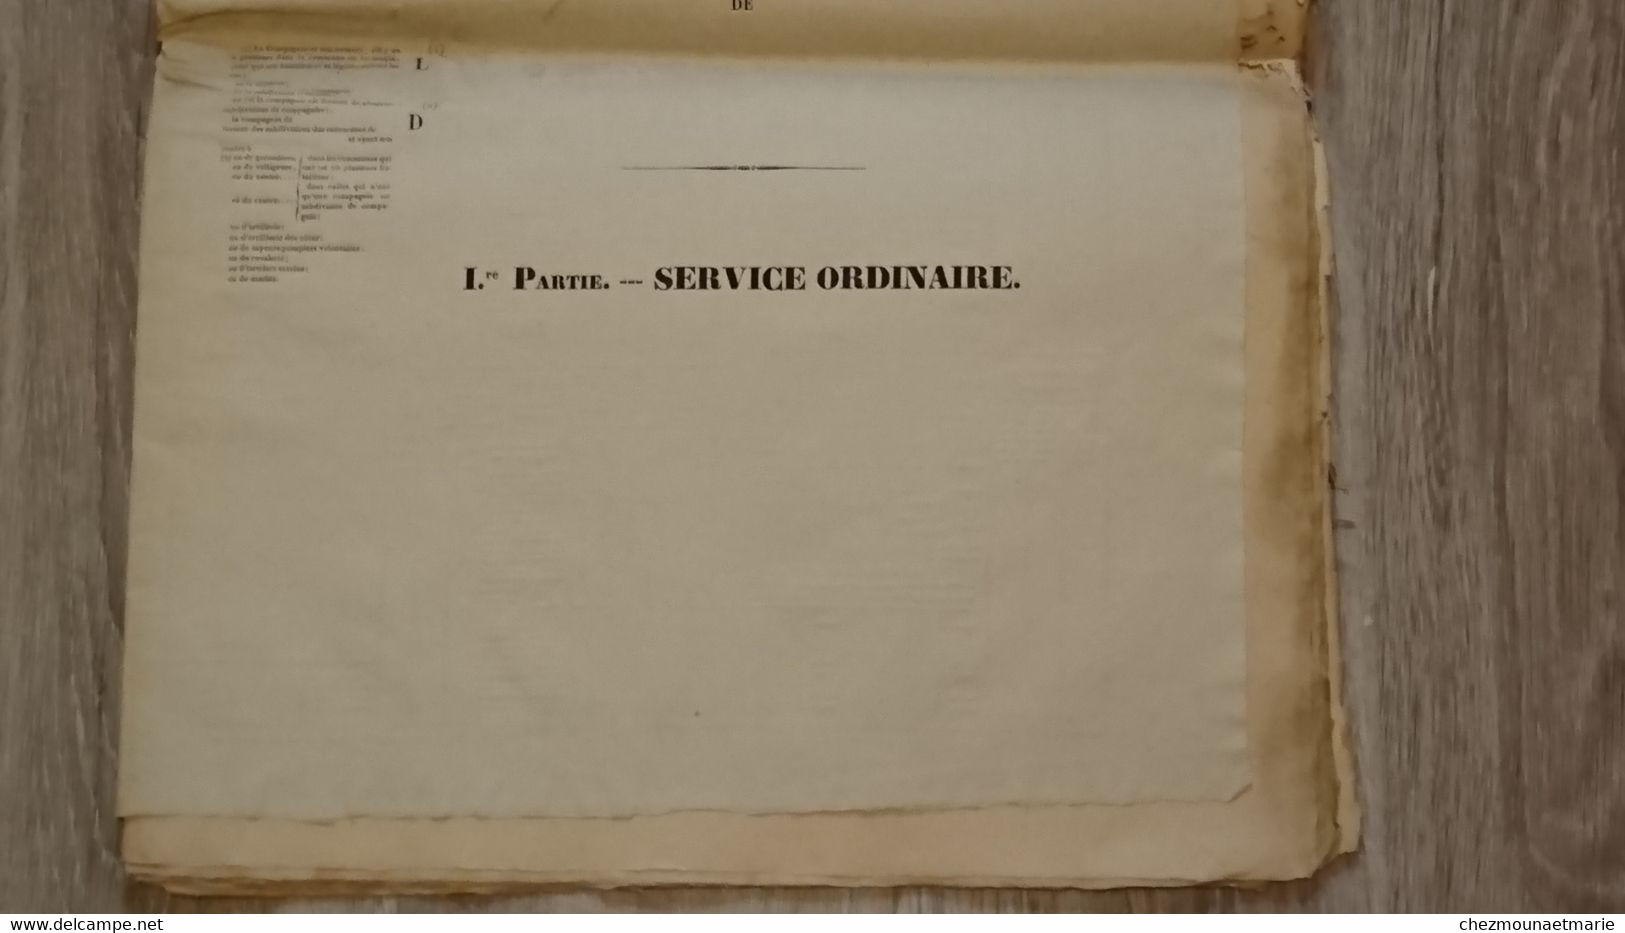 GARDE NATIONALE CONTROLE MATRICULE VIERGE 22 PAGES A COMPLETER TAILLE 54*37 CM - Documentos Históricos